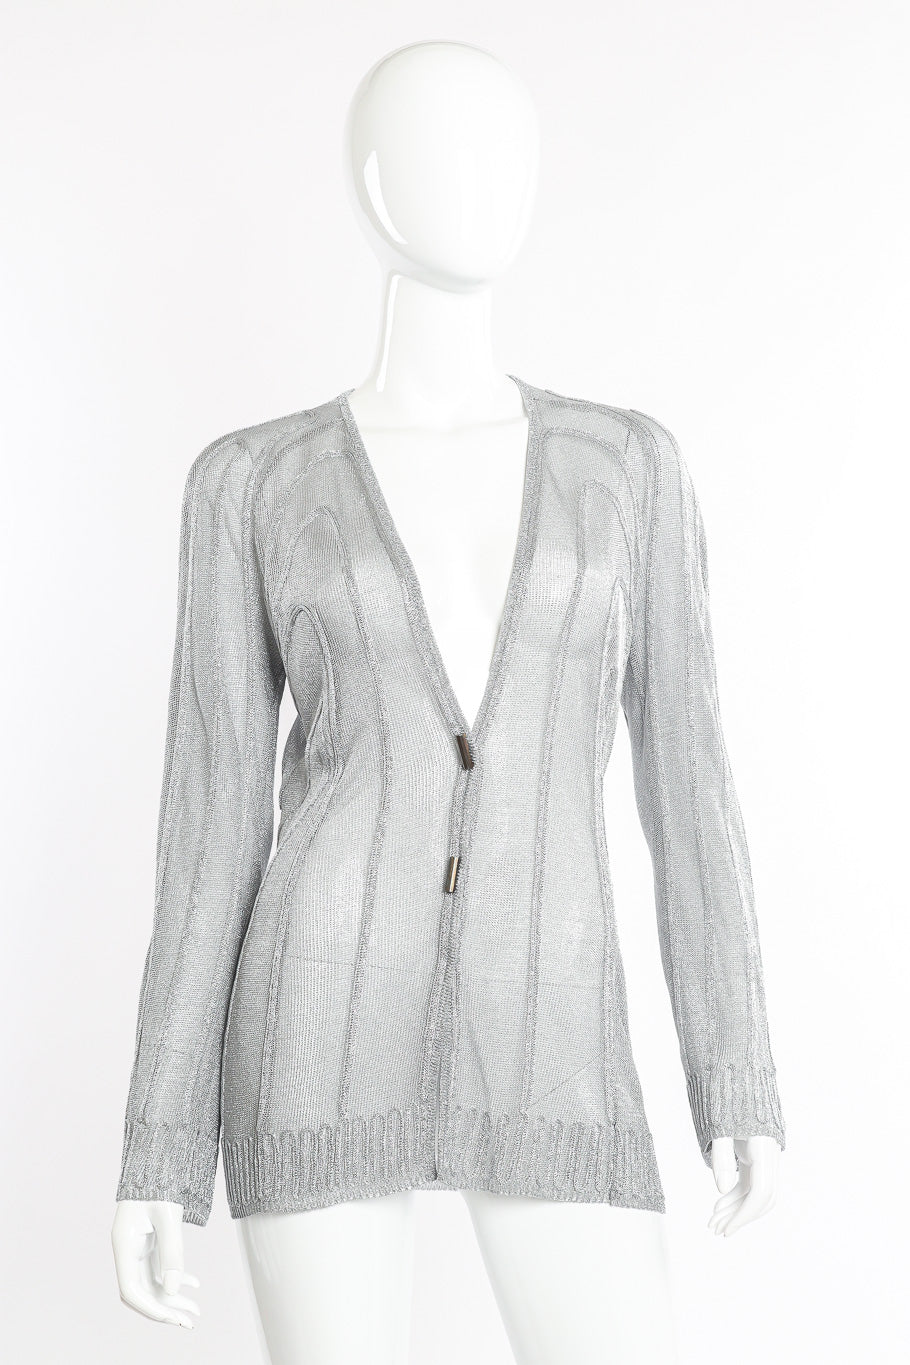 Vintage Thierry Mugler Metallic Cable Knit Cardigan front view on mannequin @Recessla